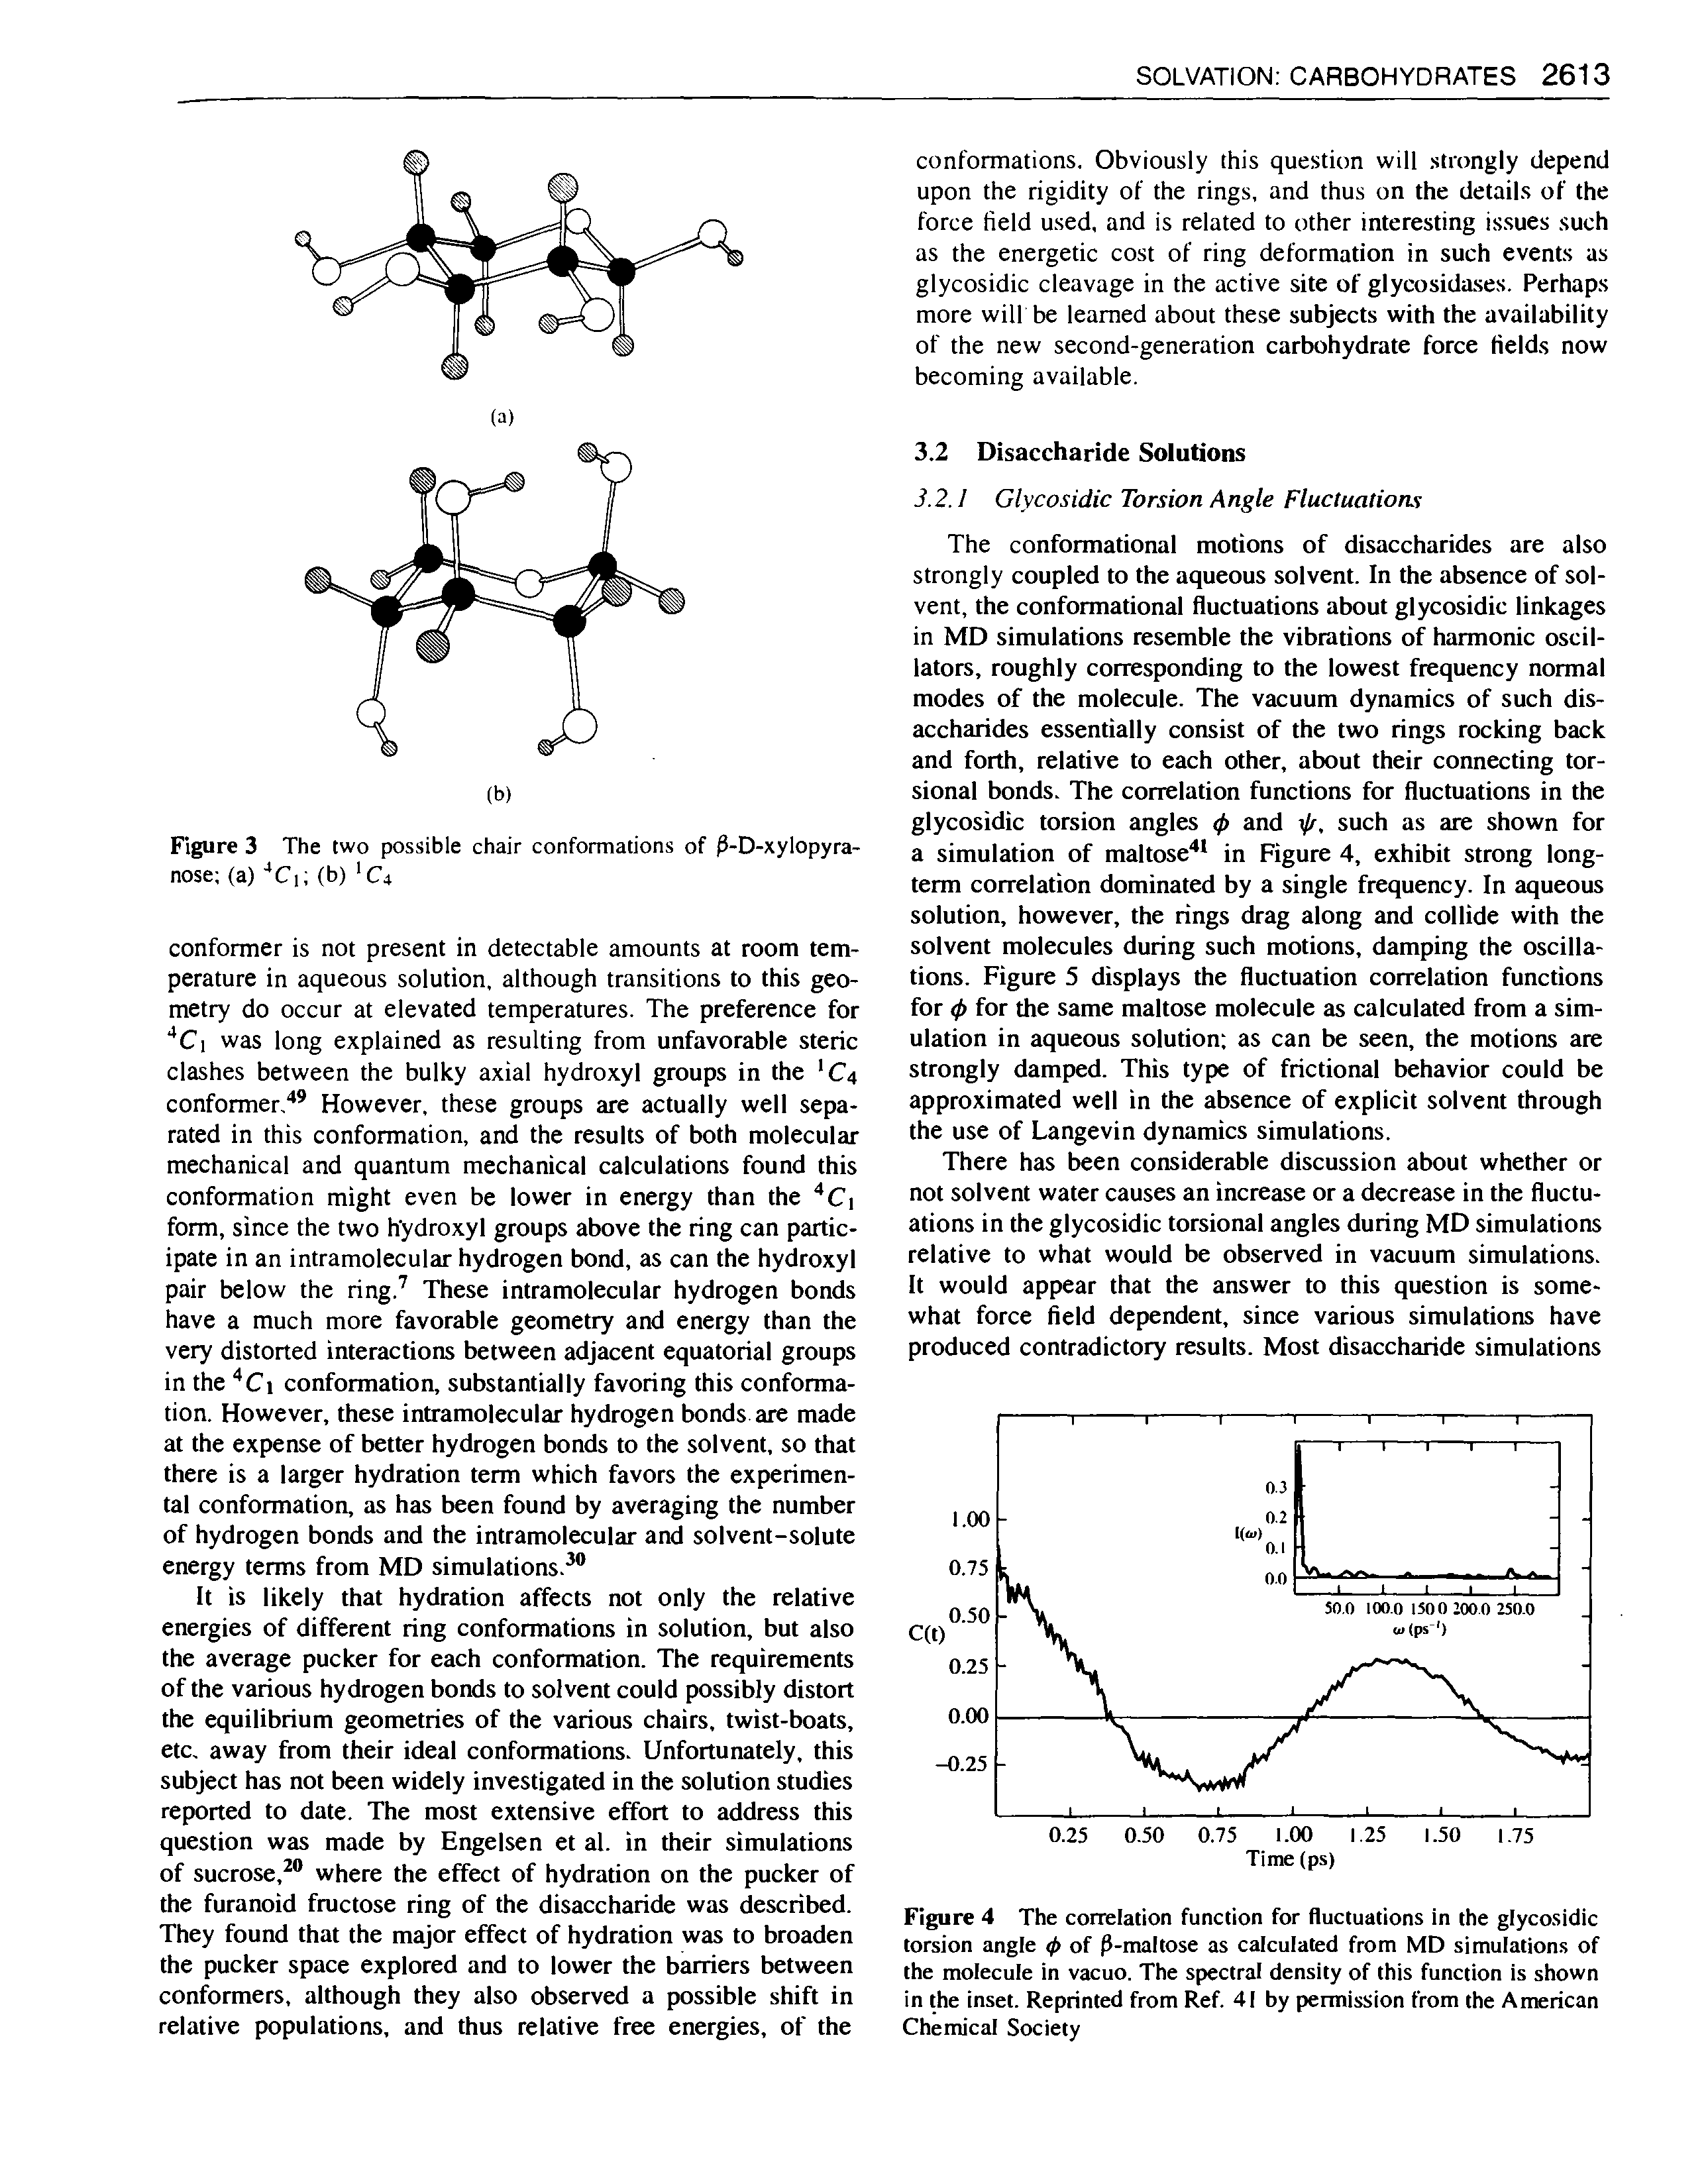 Figure 4 The correlation function for fluctuations in the glycosidic torsion angle <j> of fi-maltose as calculated from MD simulations of the molecule in vacuo. The spectral density of this function is shown in the inset. Reprinted from Ref. 41 by permission from the American Chemical Society...